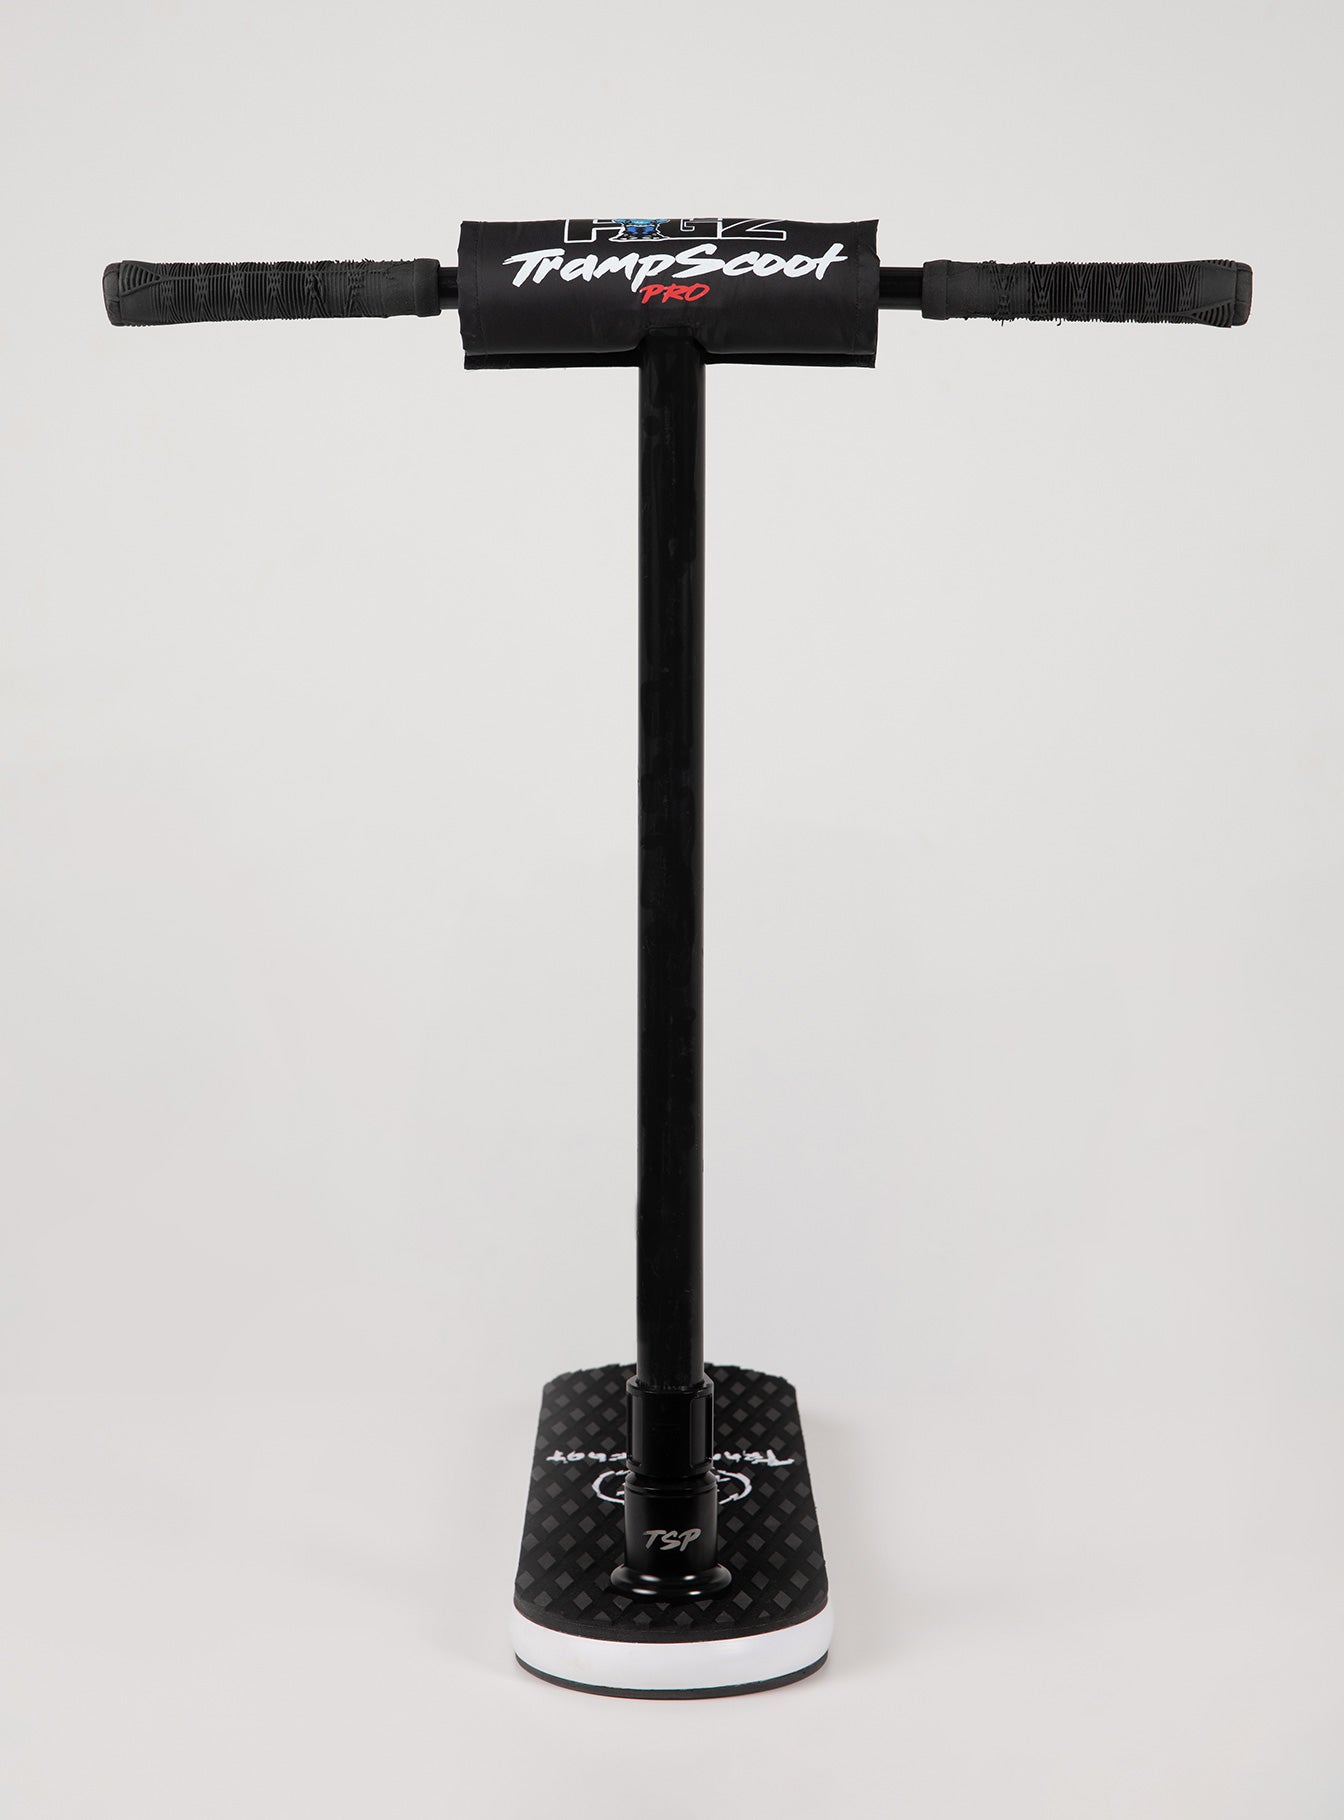 TrampScoot Pro - Trampoline Scooter